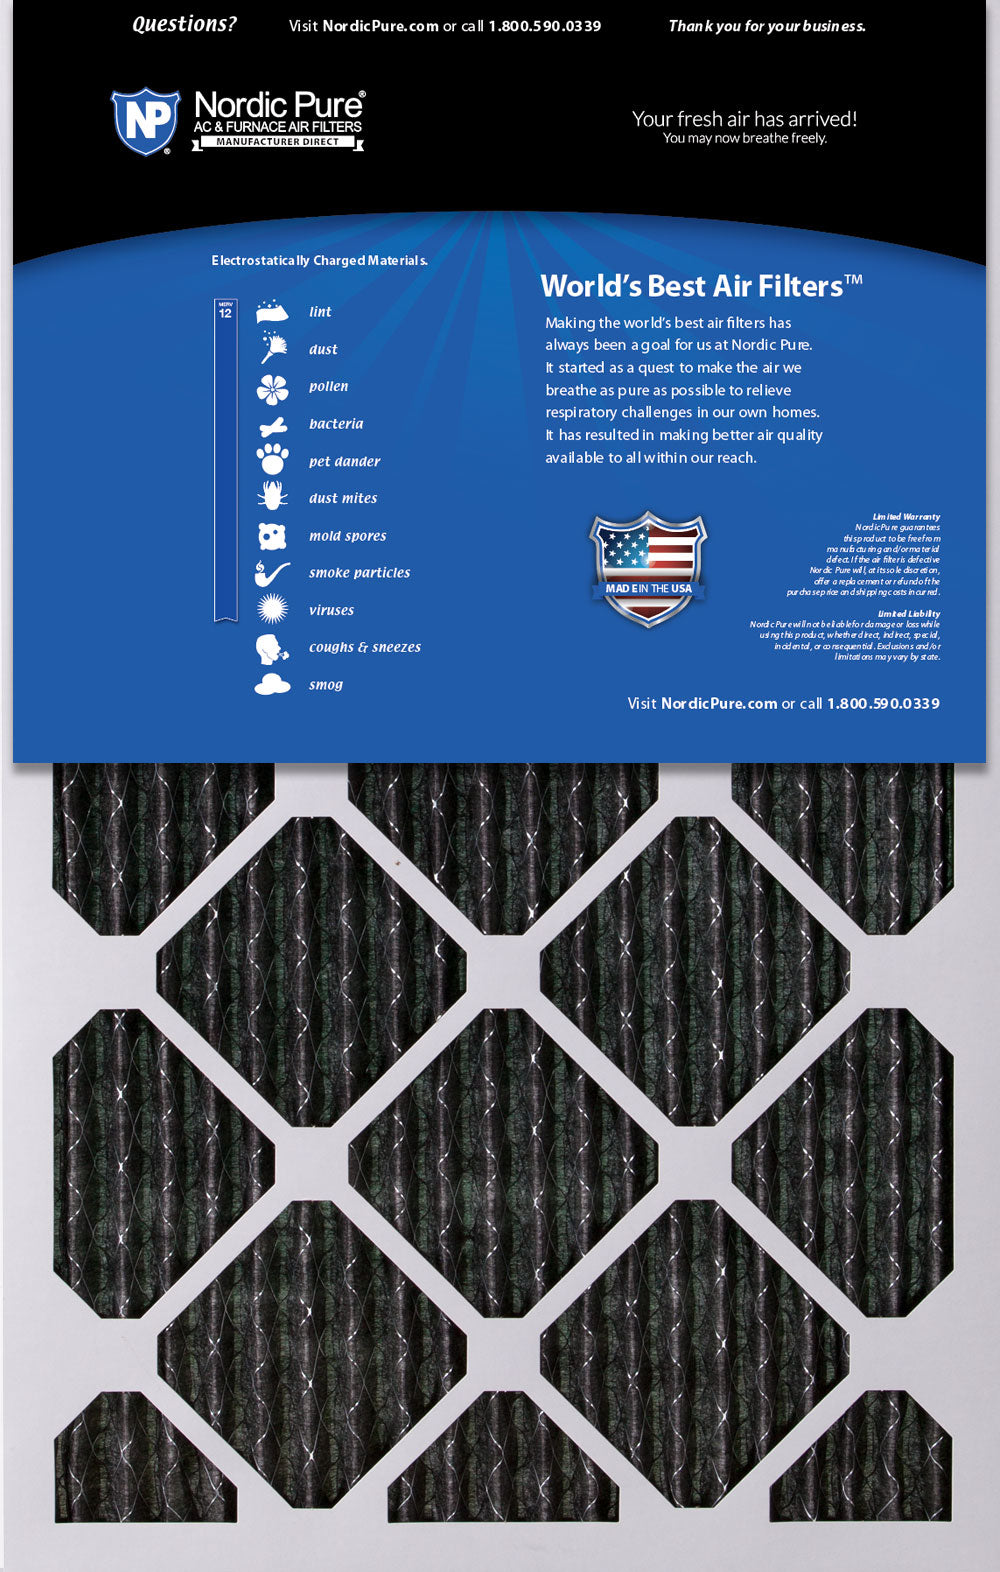 14x24x1 Furnace Air Filters MERV 12 Pleated Plus Carbon